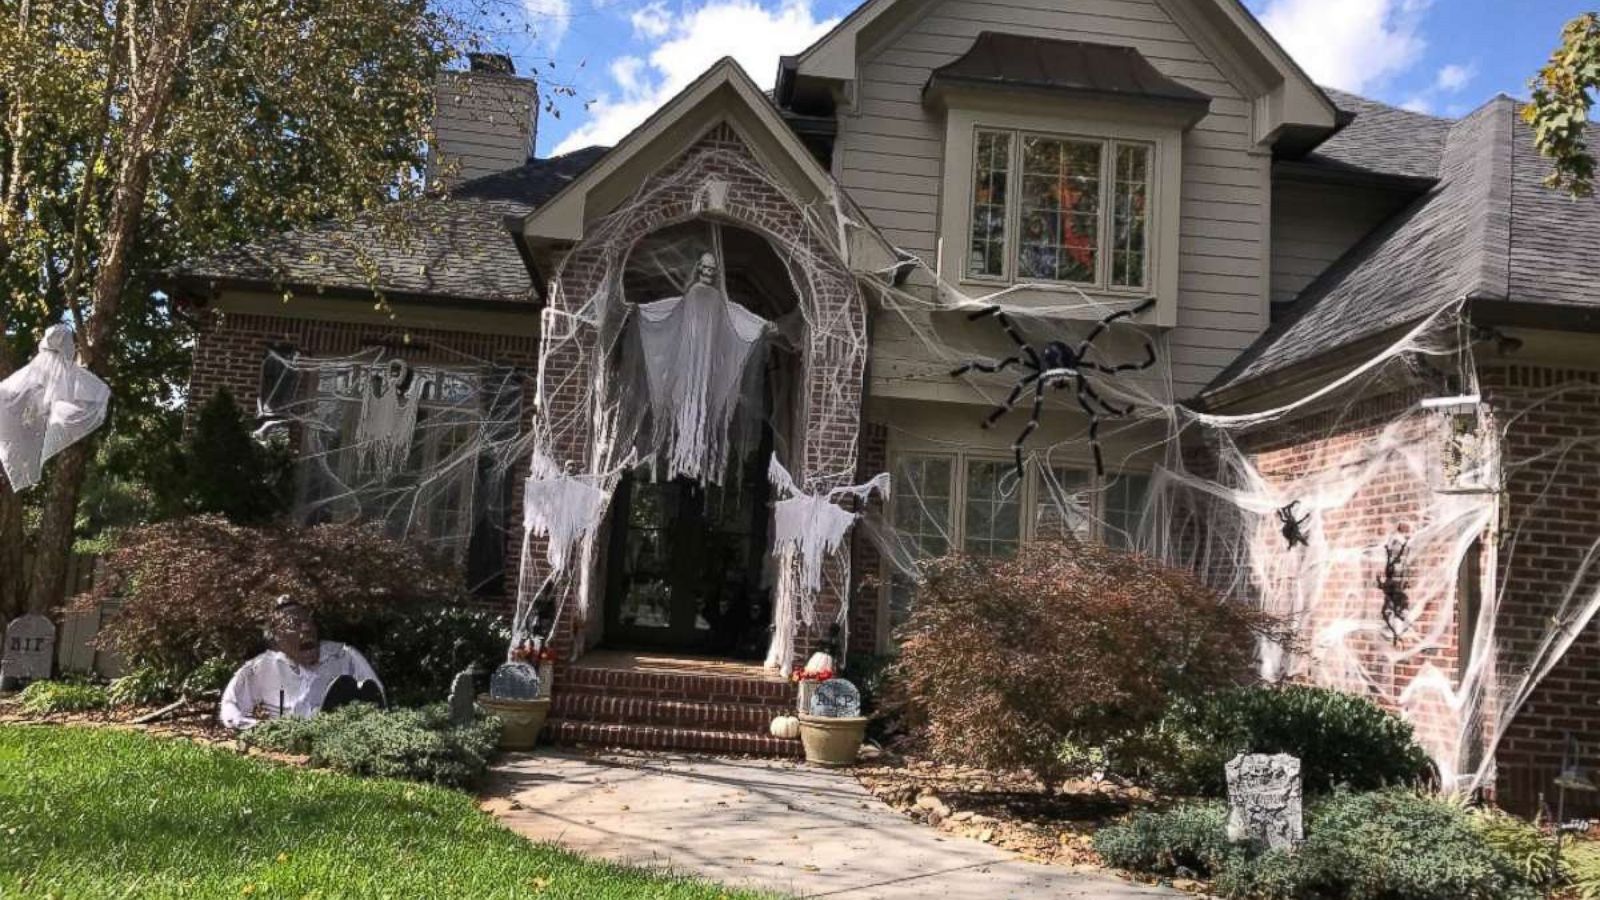 Halloween Decorated House Sale Online - anuariocidob.org 1692962672